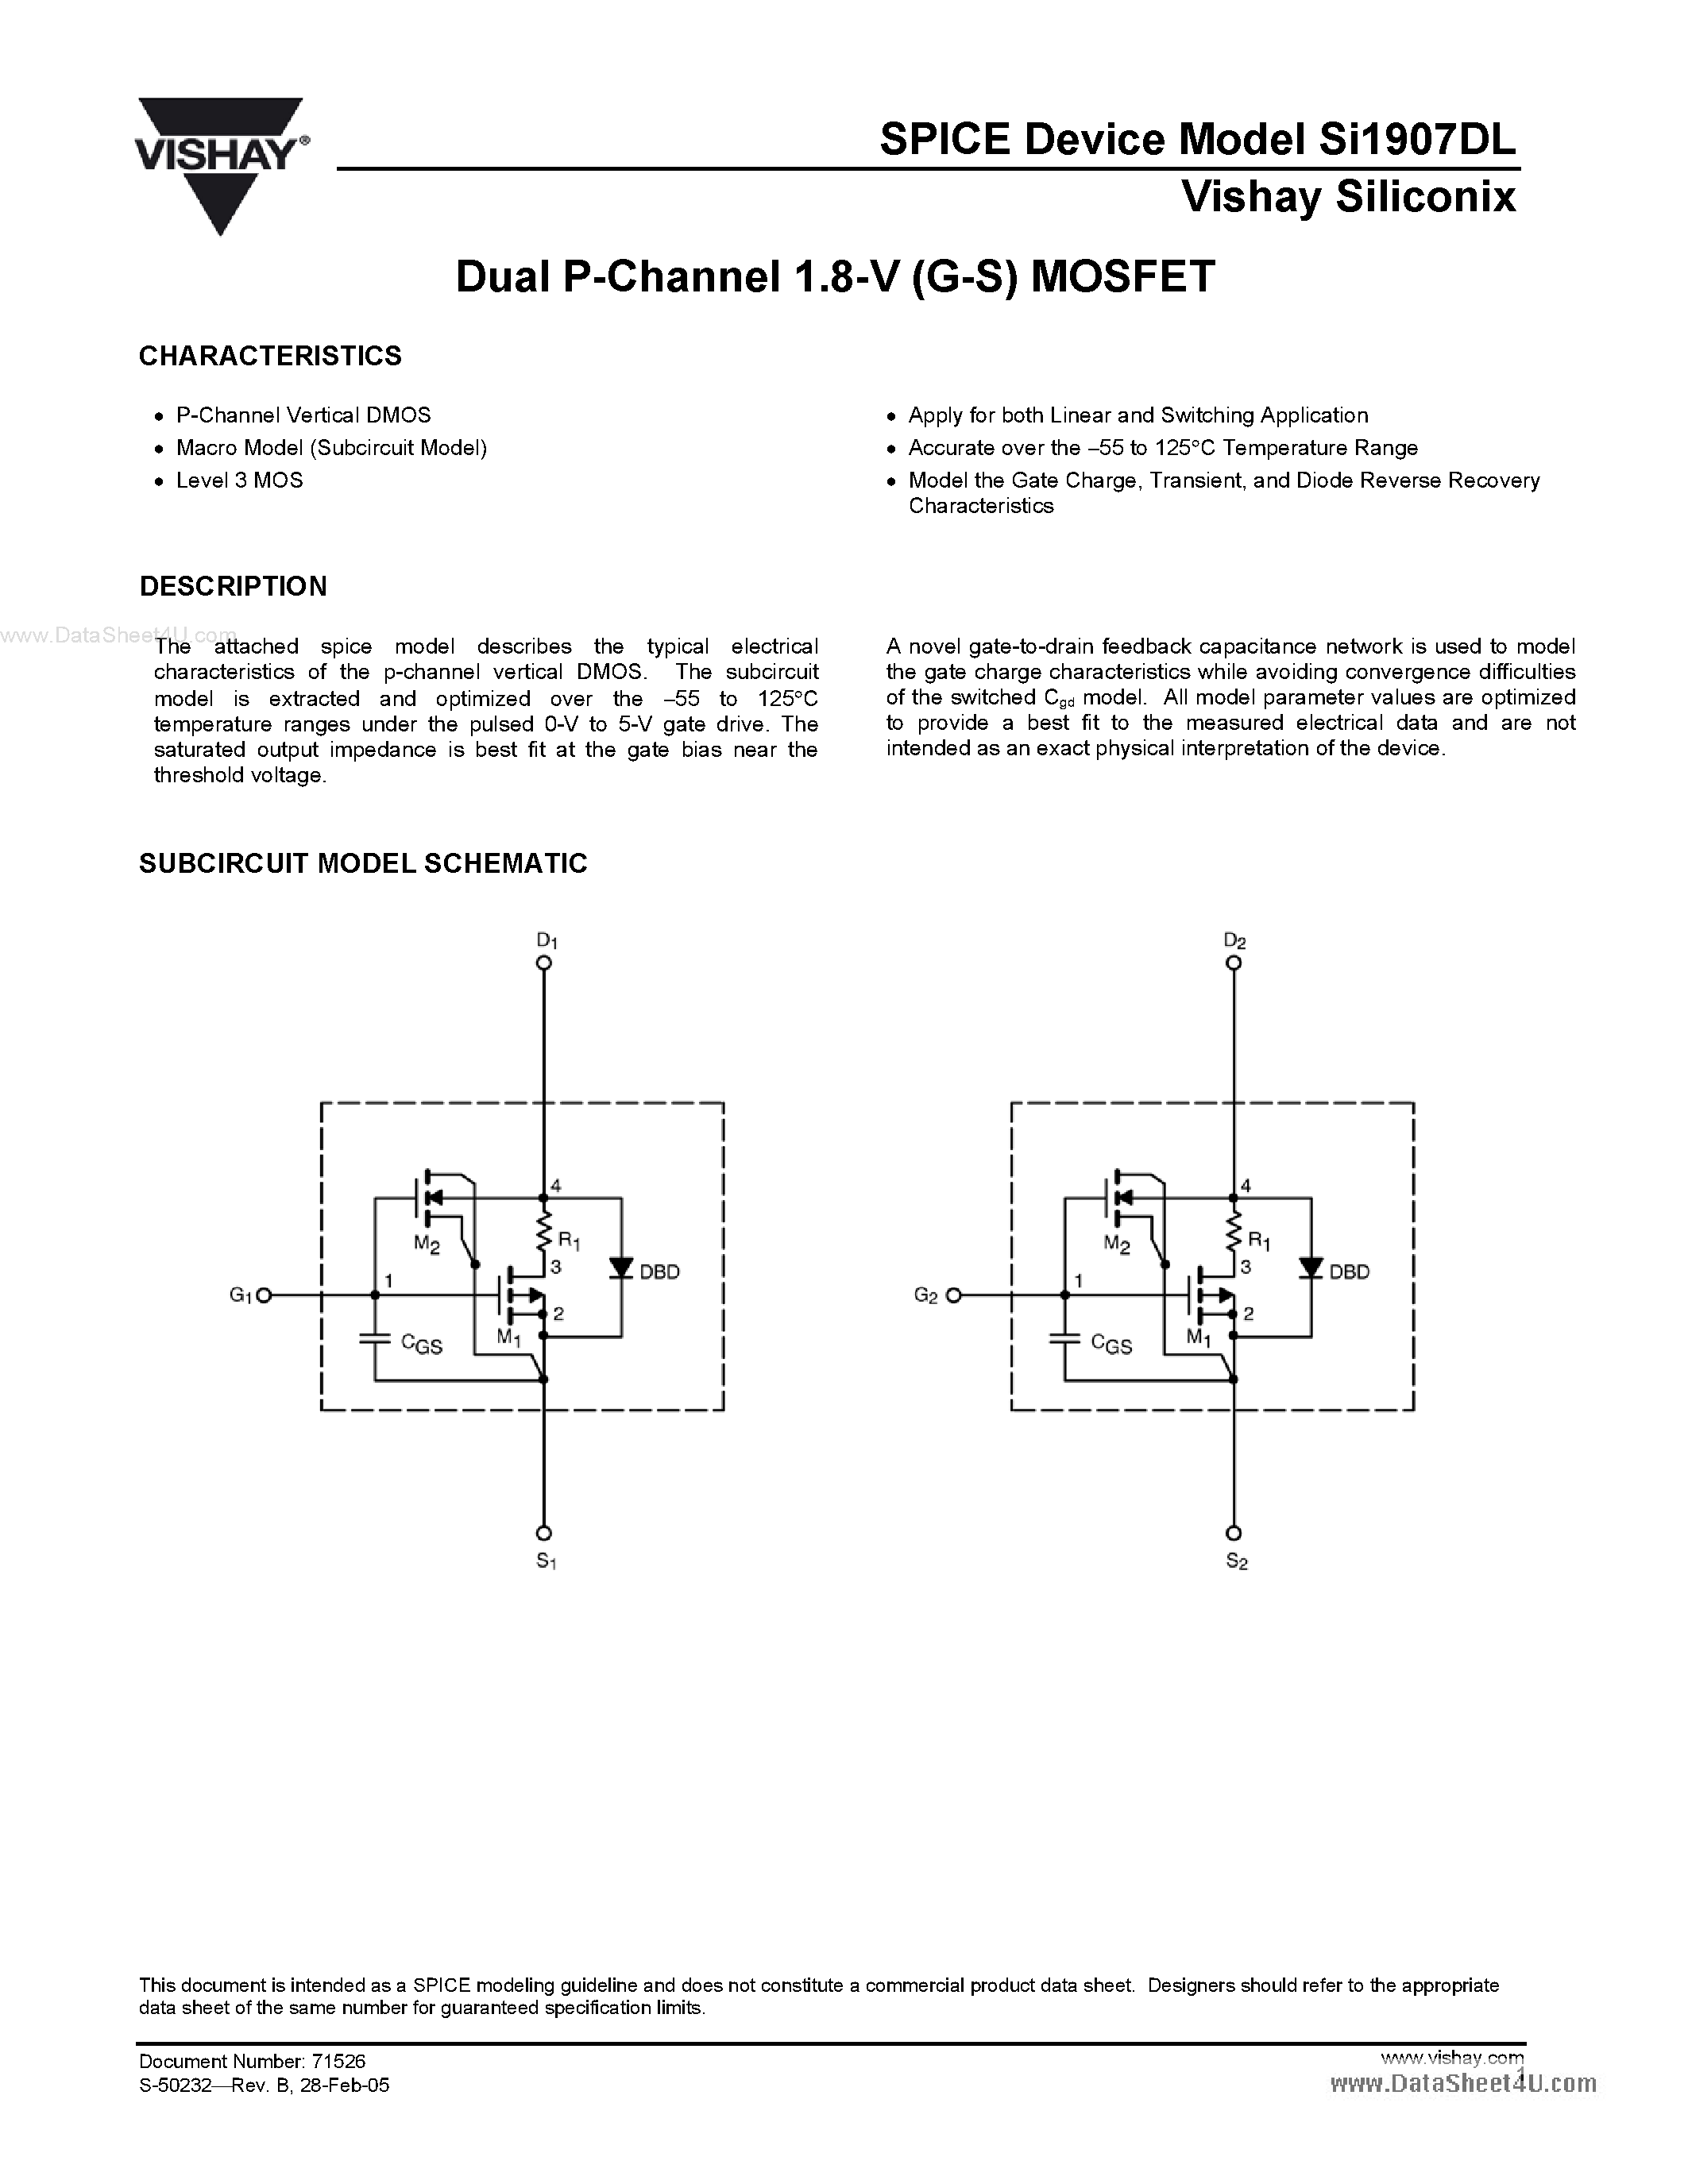 Даташит SI1907DL - Dual P-Channel 1.8-V (G-S) MOSFET страница 1